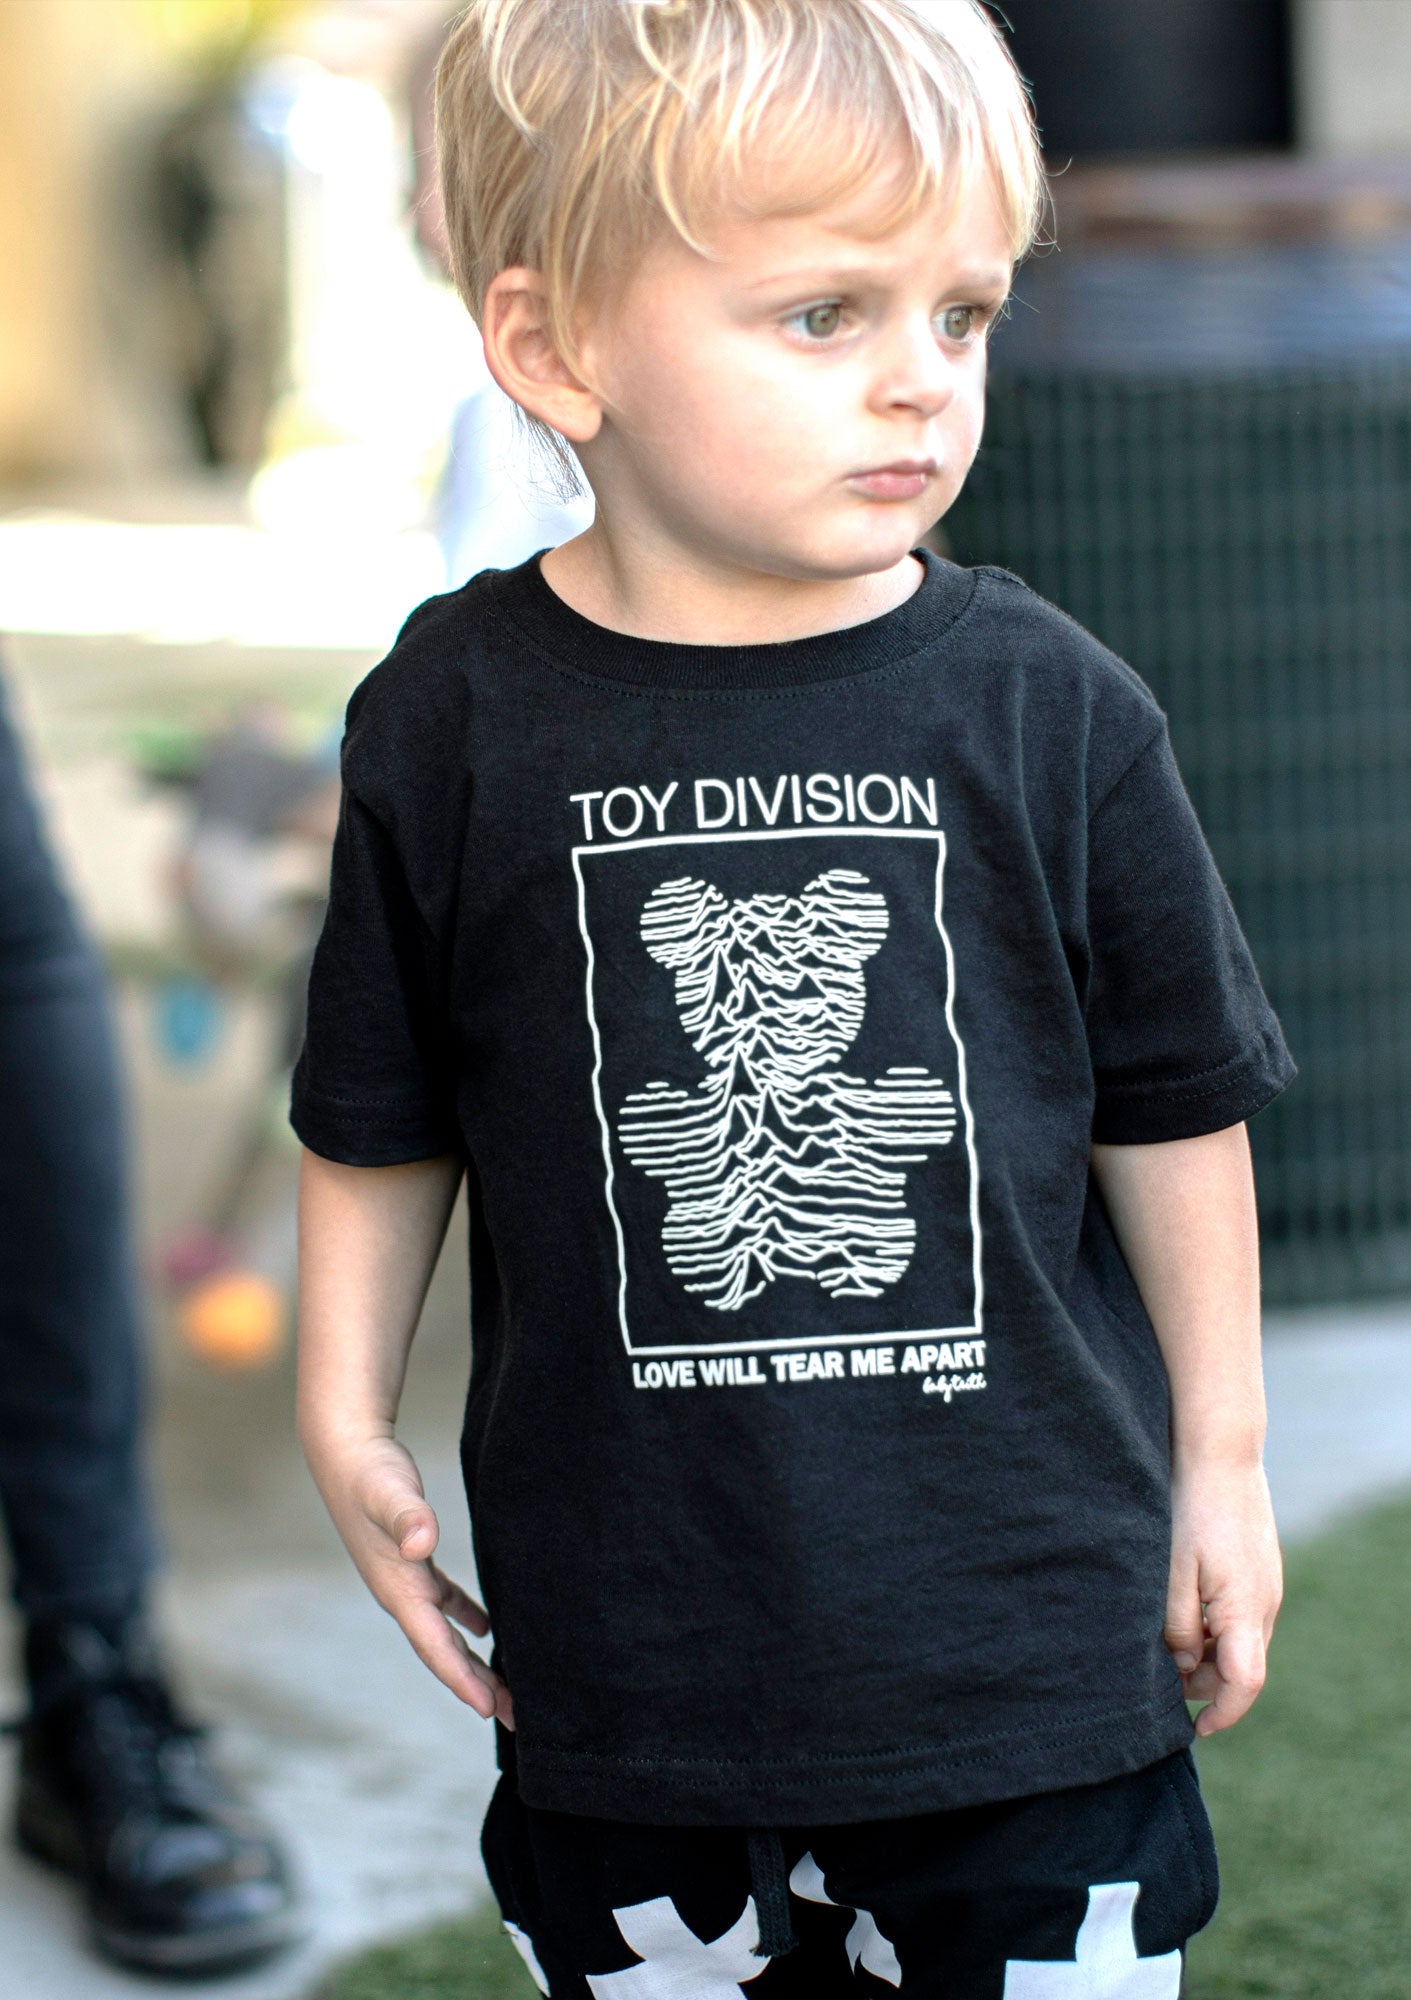 Baby Teith “Toy Division” Tee